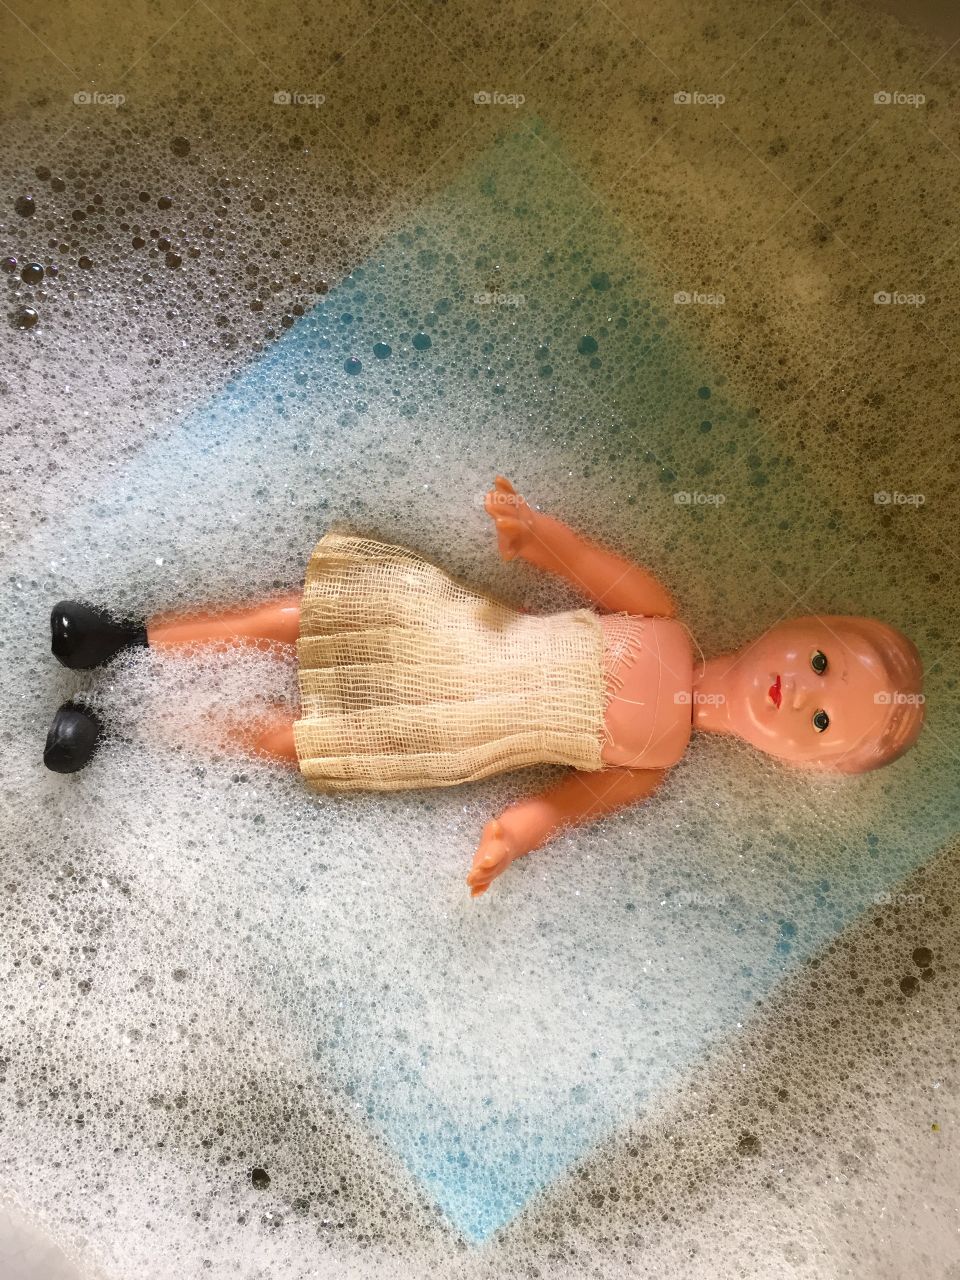 Puppet in water